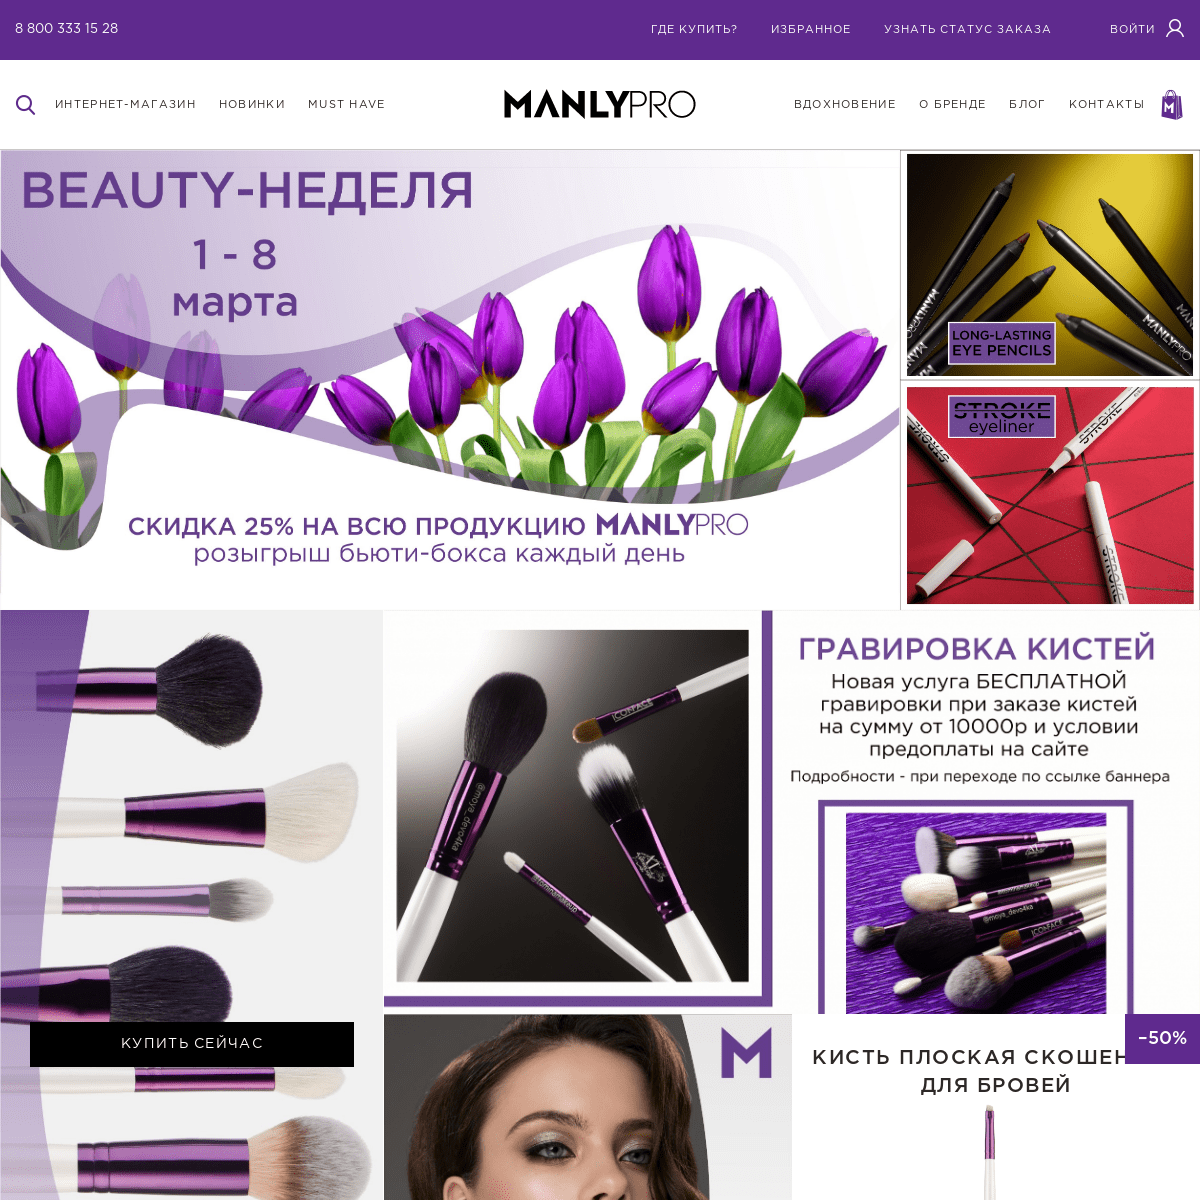 A complete backup of manlycosmetics.ru